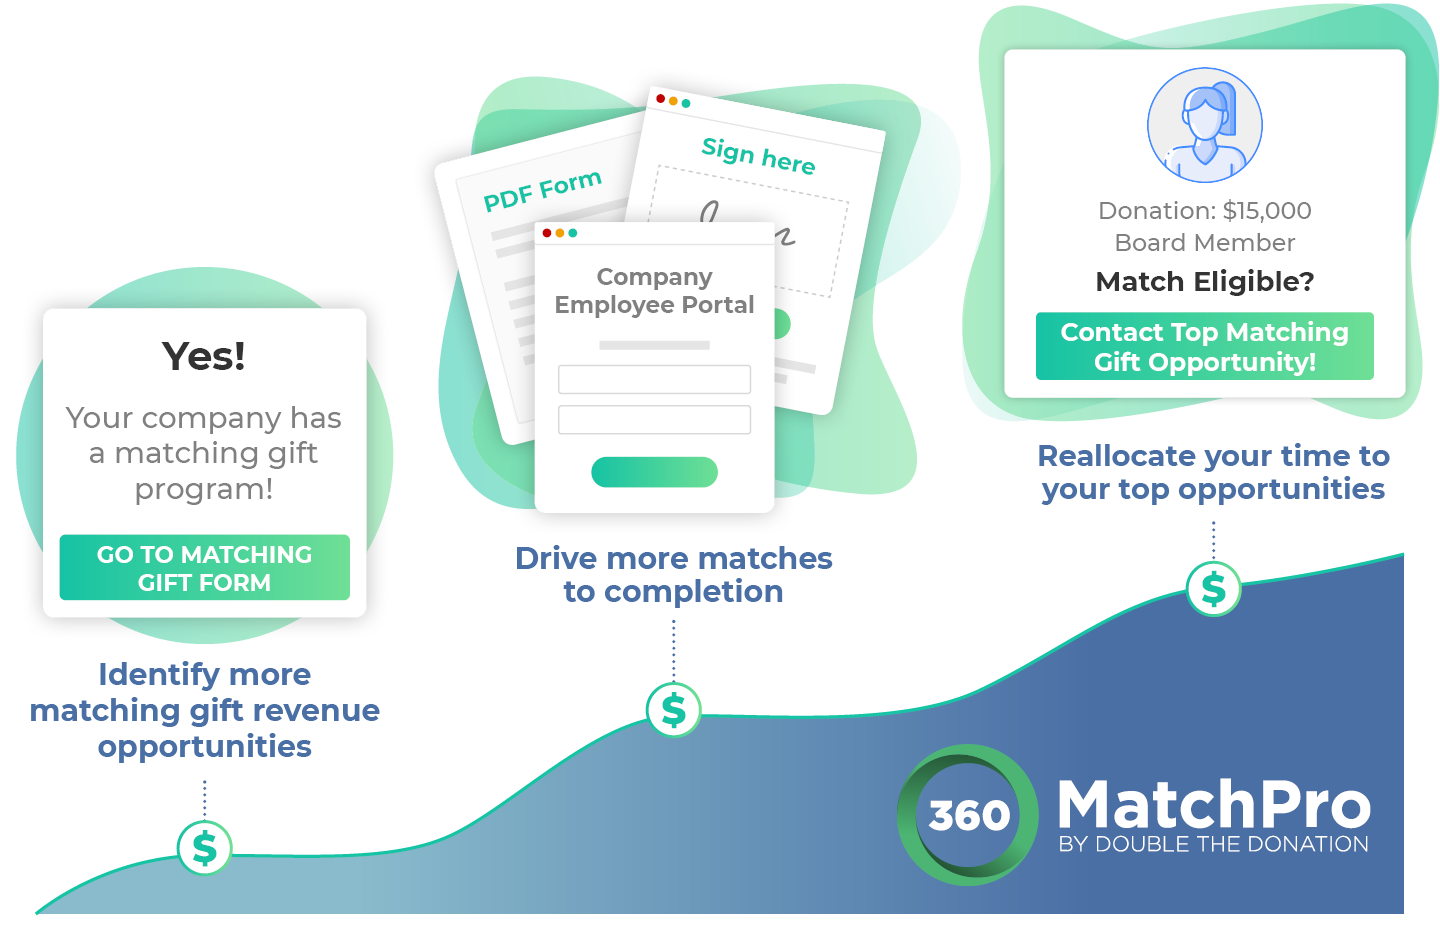 360MatchPro's fundraising software overview